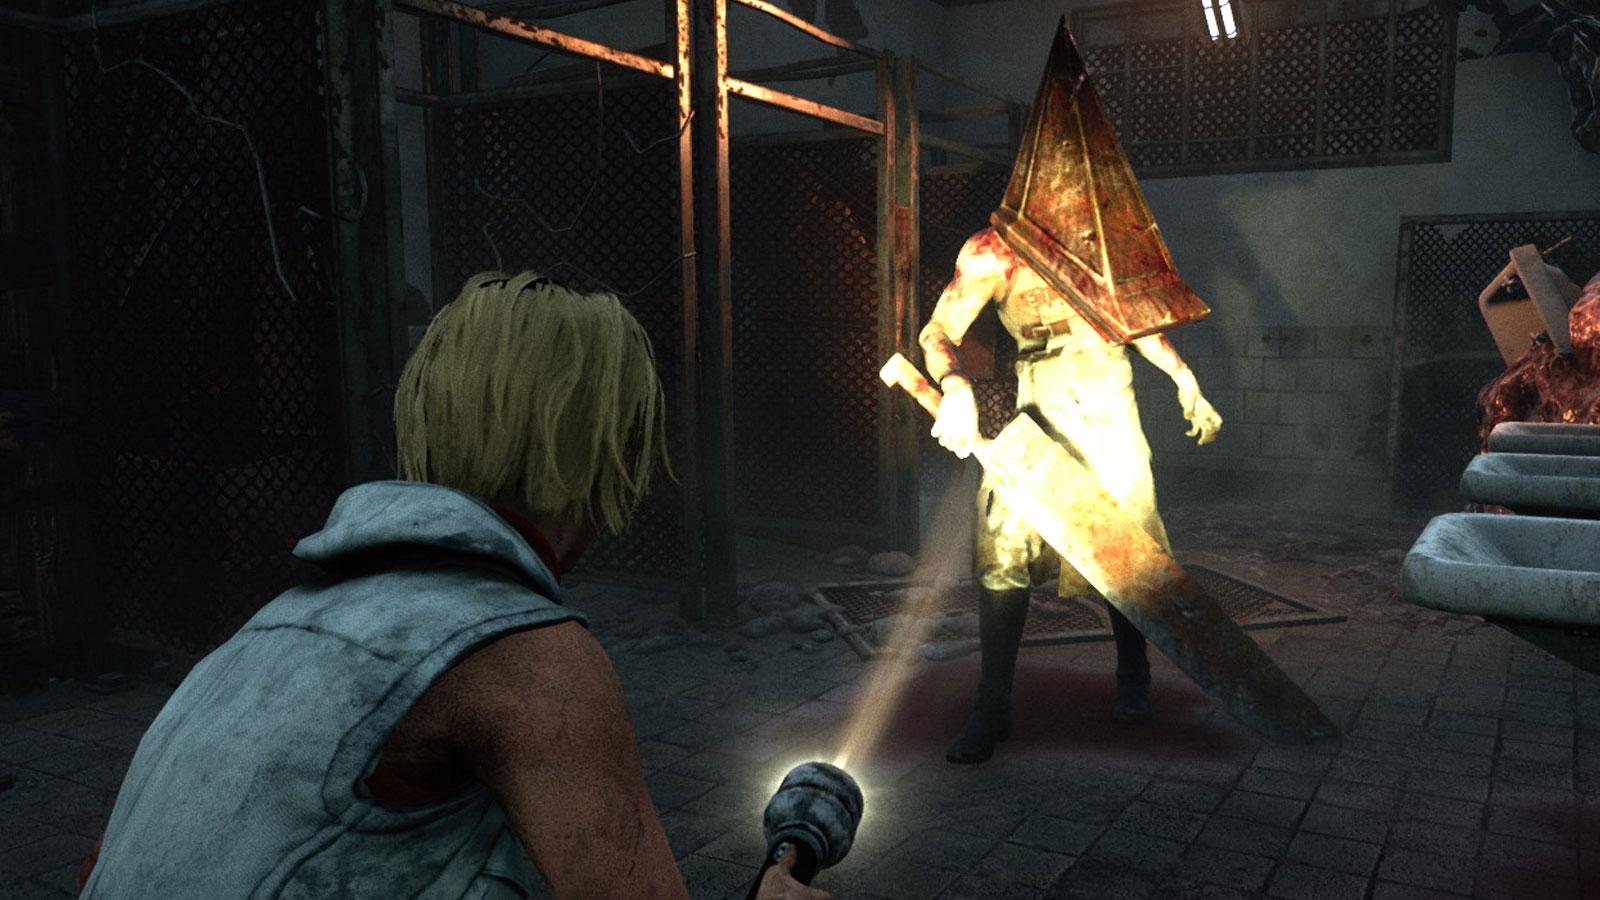 Silent Hill' is back, say the rumours - but what does that mean?